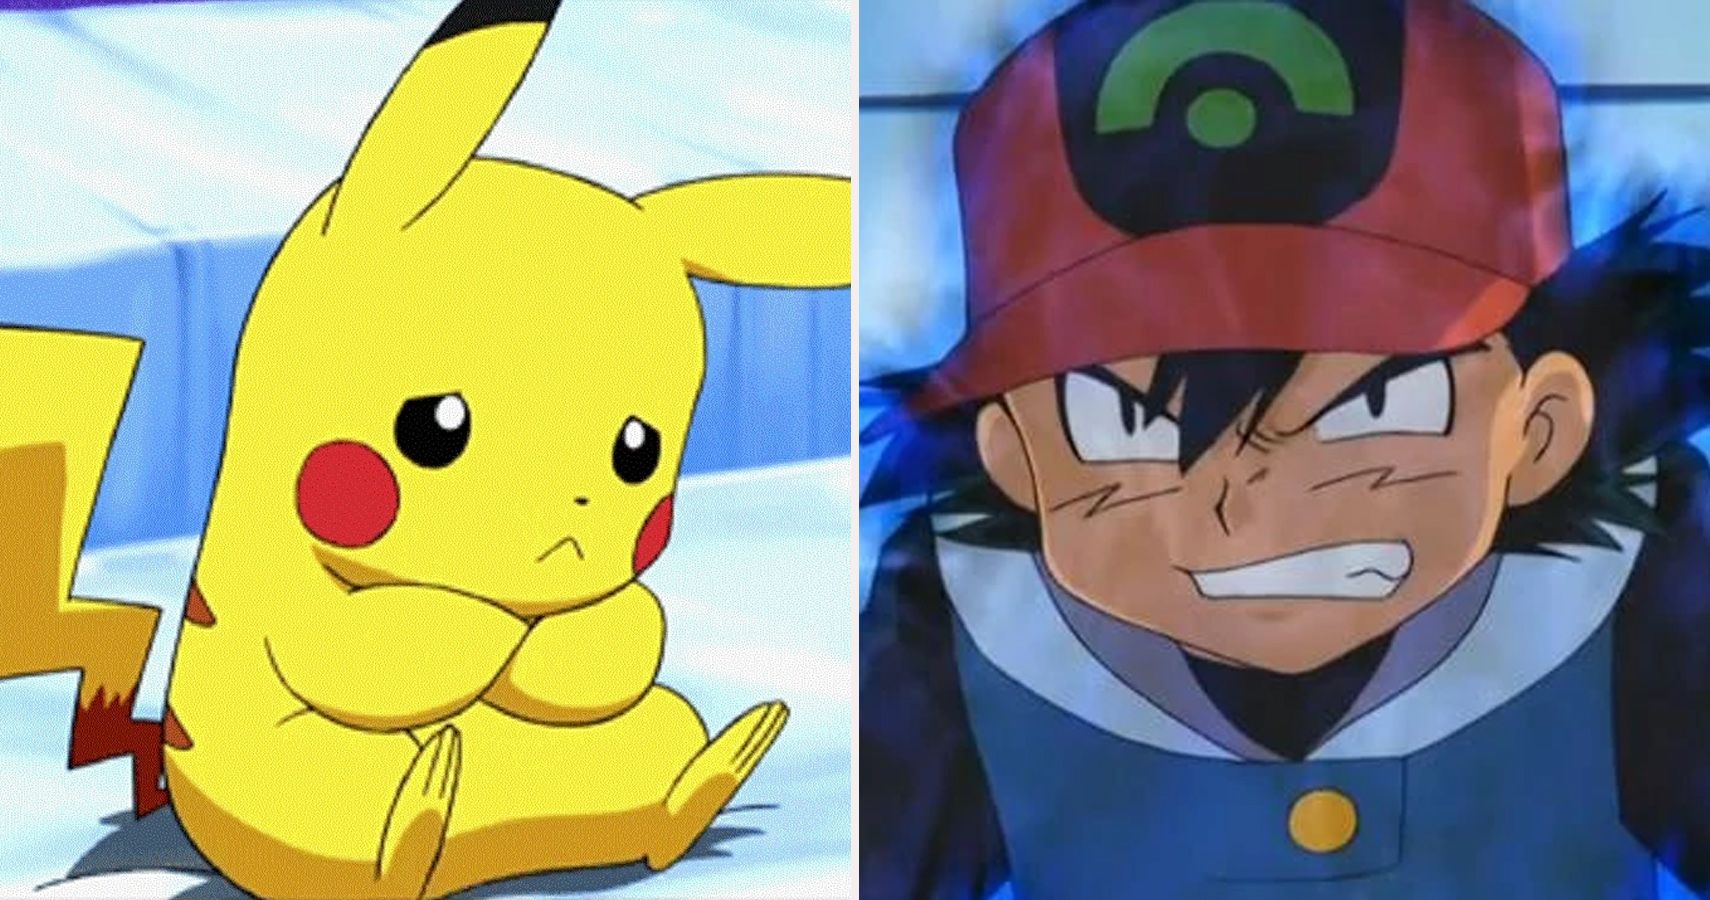 Ash Ketchum and Pikachu are leaving Pokemon after 25 years - Xfire